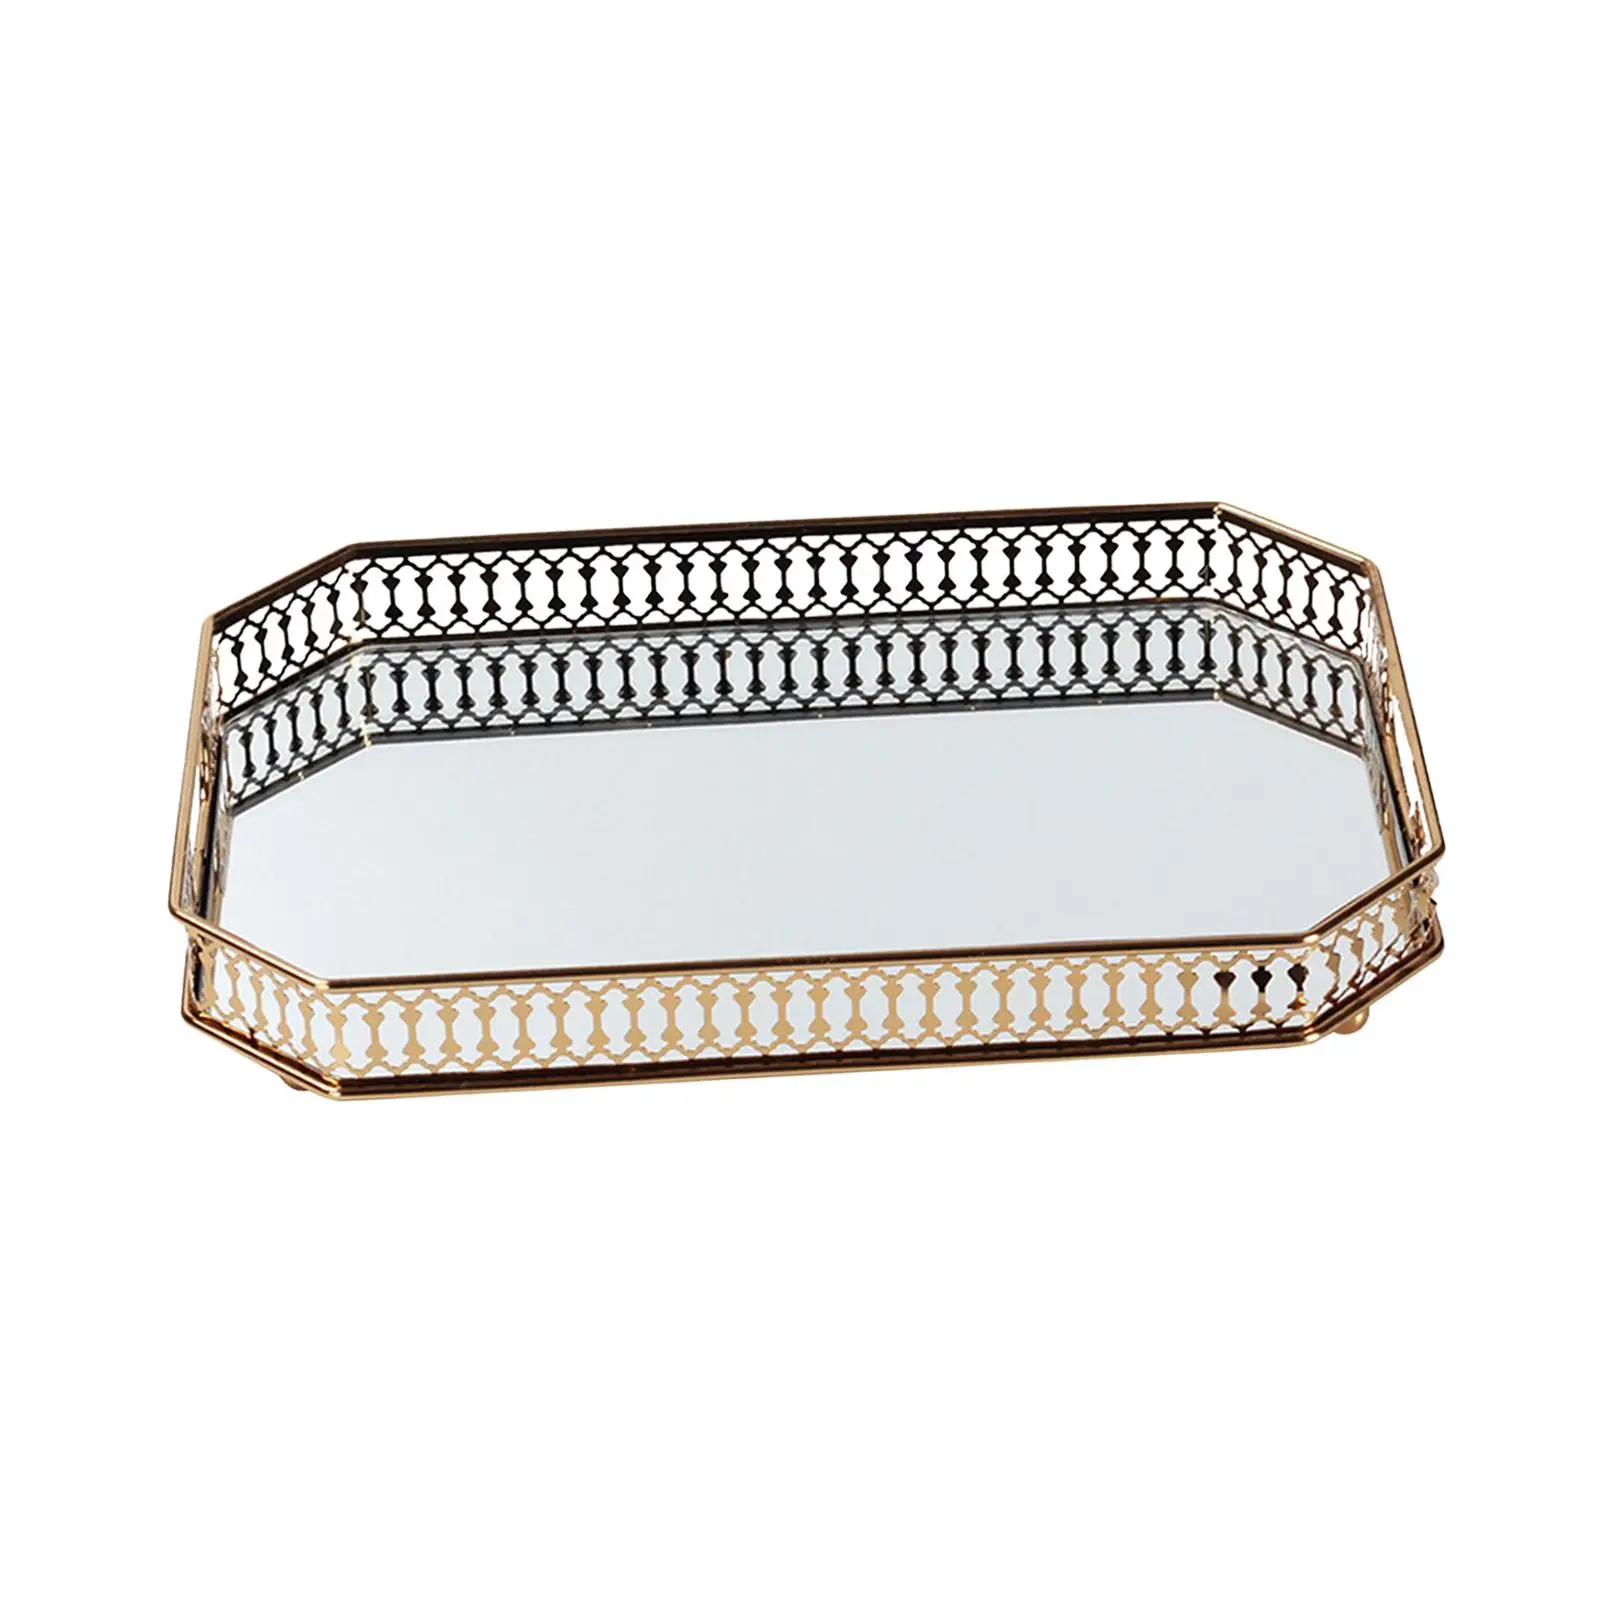 Mirror Serving Tray Serving Plate Modern Decorative Mirrored Tray for Vanity for dessert Food Snack Cake Cosmetic Storage